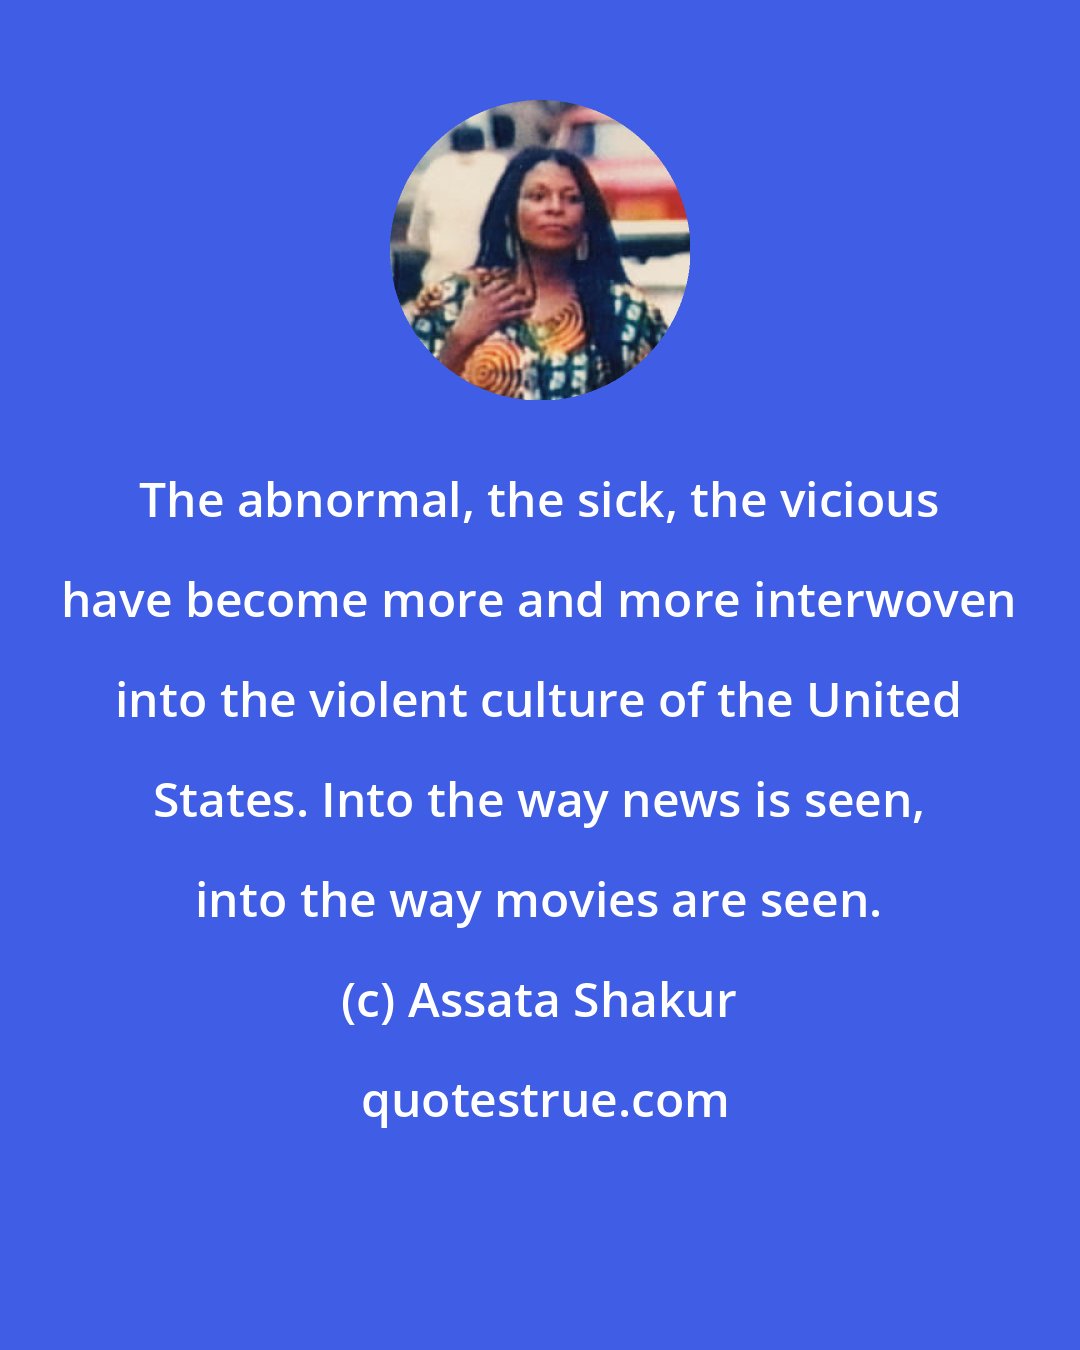 Assata Shakur: The abnormal, the sick, the vicious have become more and more interwoven into the violent culture of the United States. Into the way news is seen, into the way movies are seen.